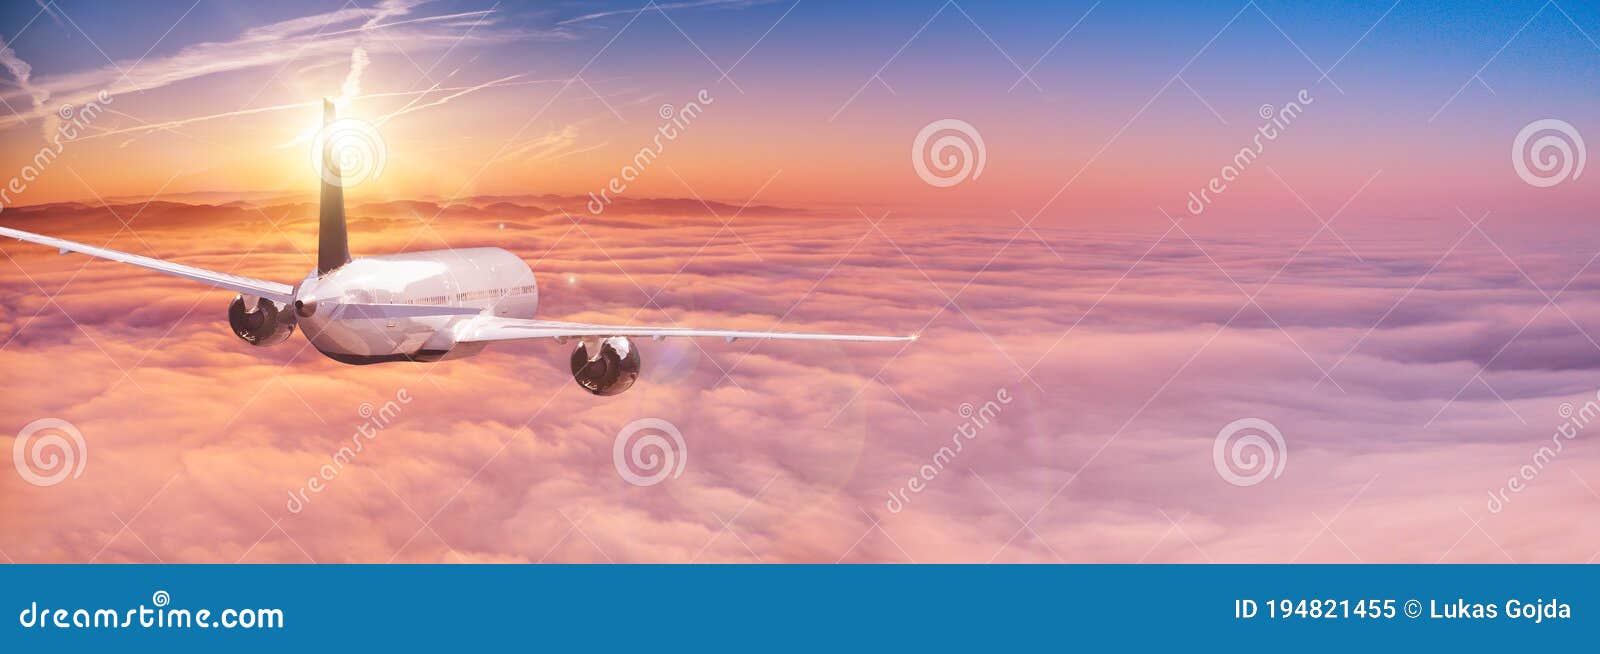 Commercial Airplane Jetliner Flying Above Dramatic Clouds. Stock Image